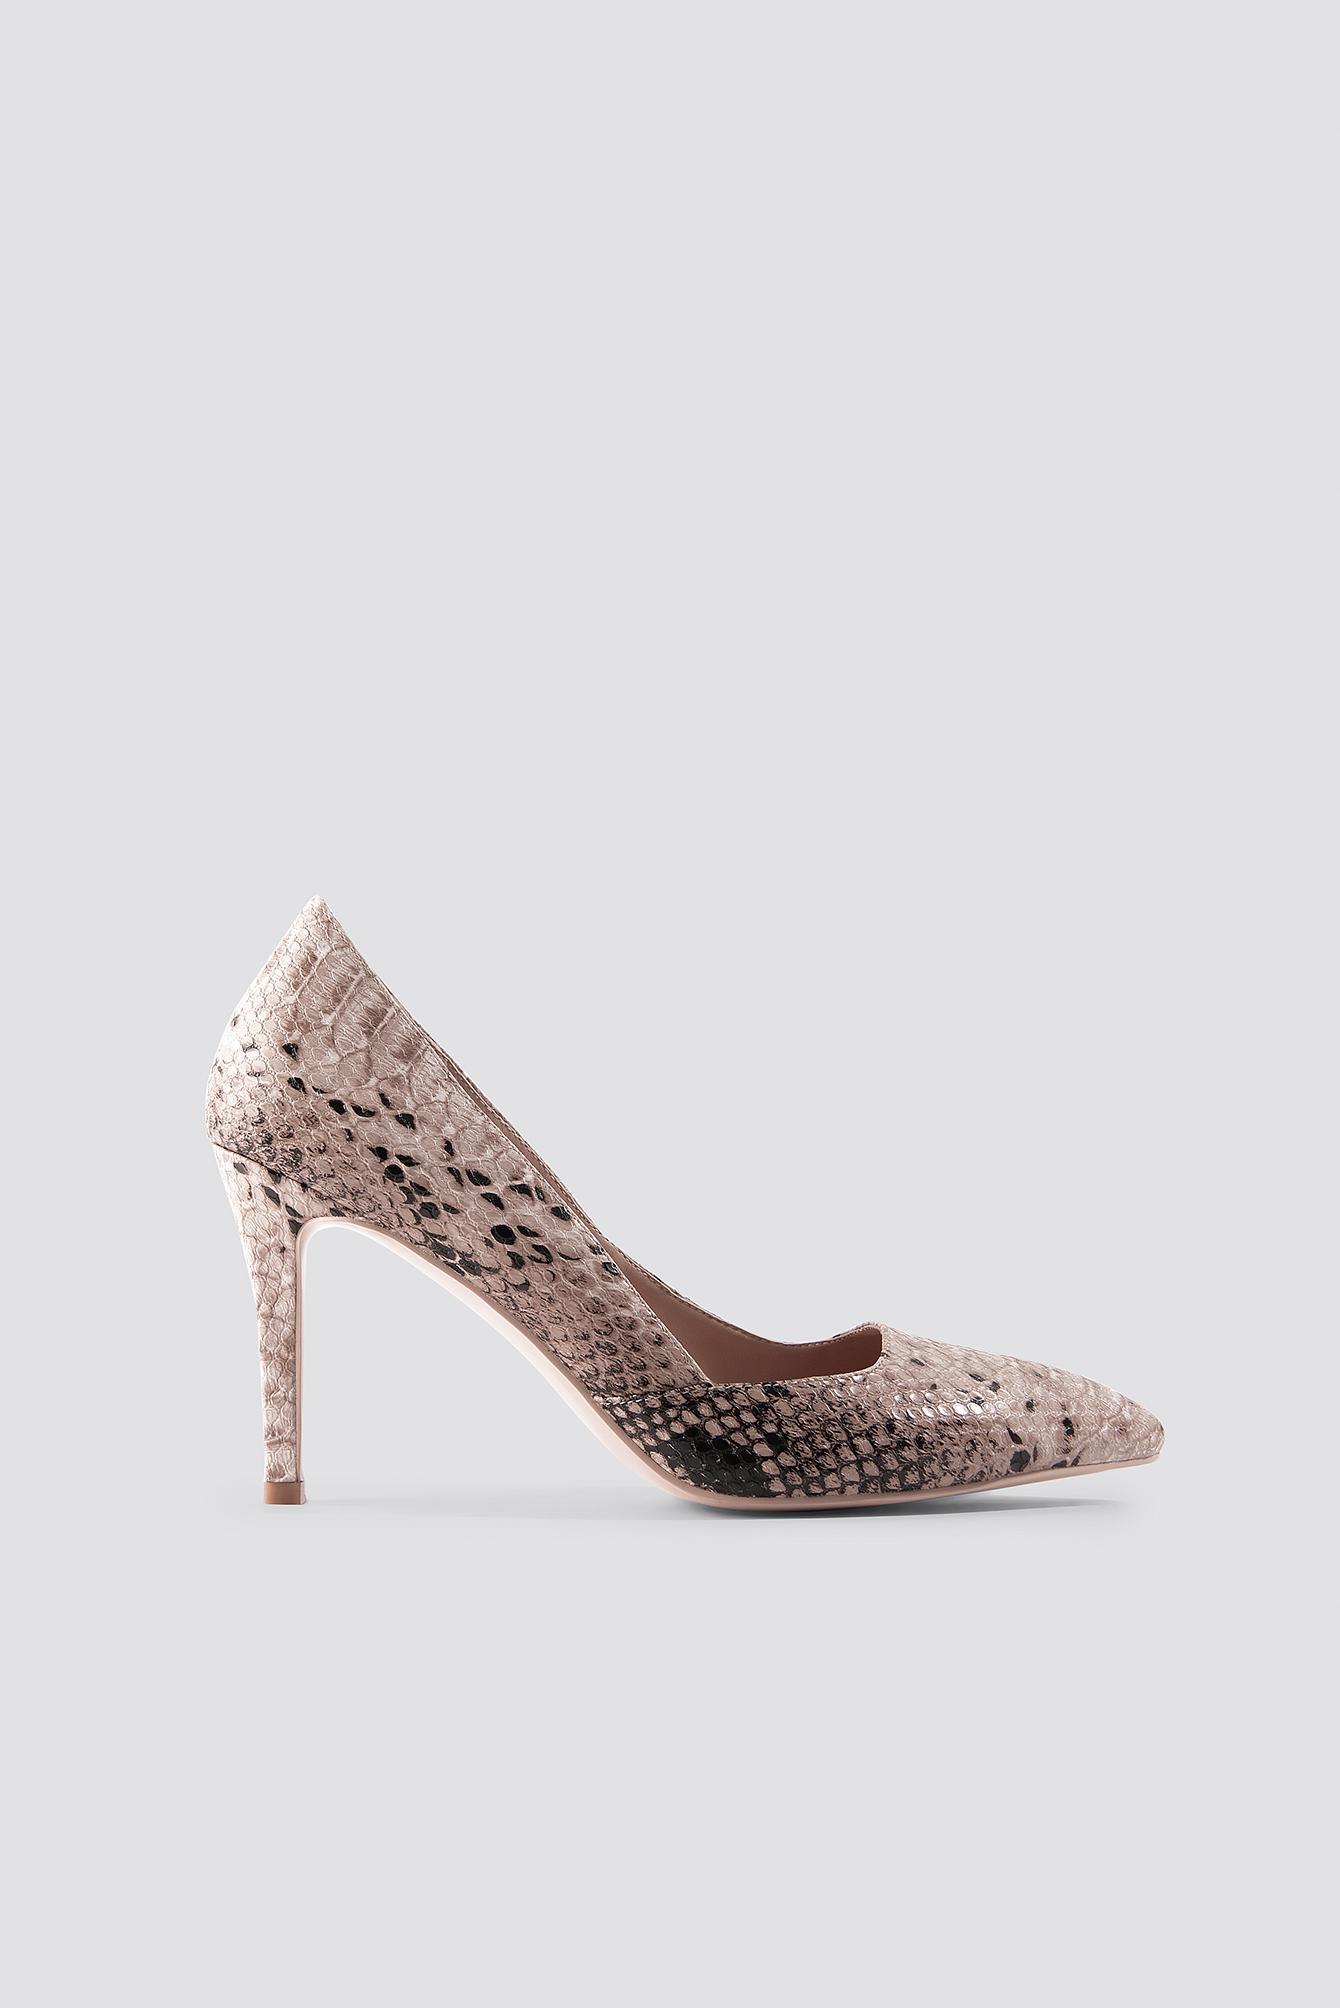 NA-KD Shoes Snake Classy Pointy Pumps - Nude